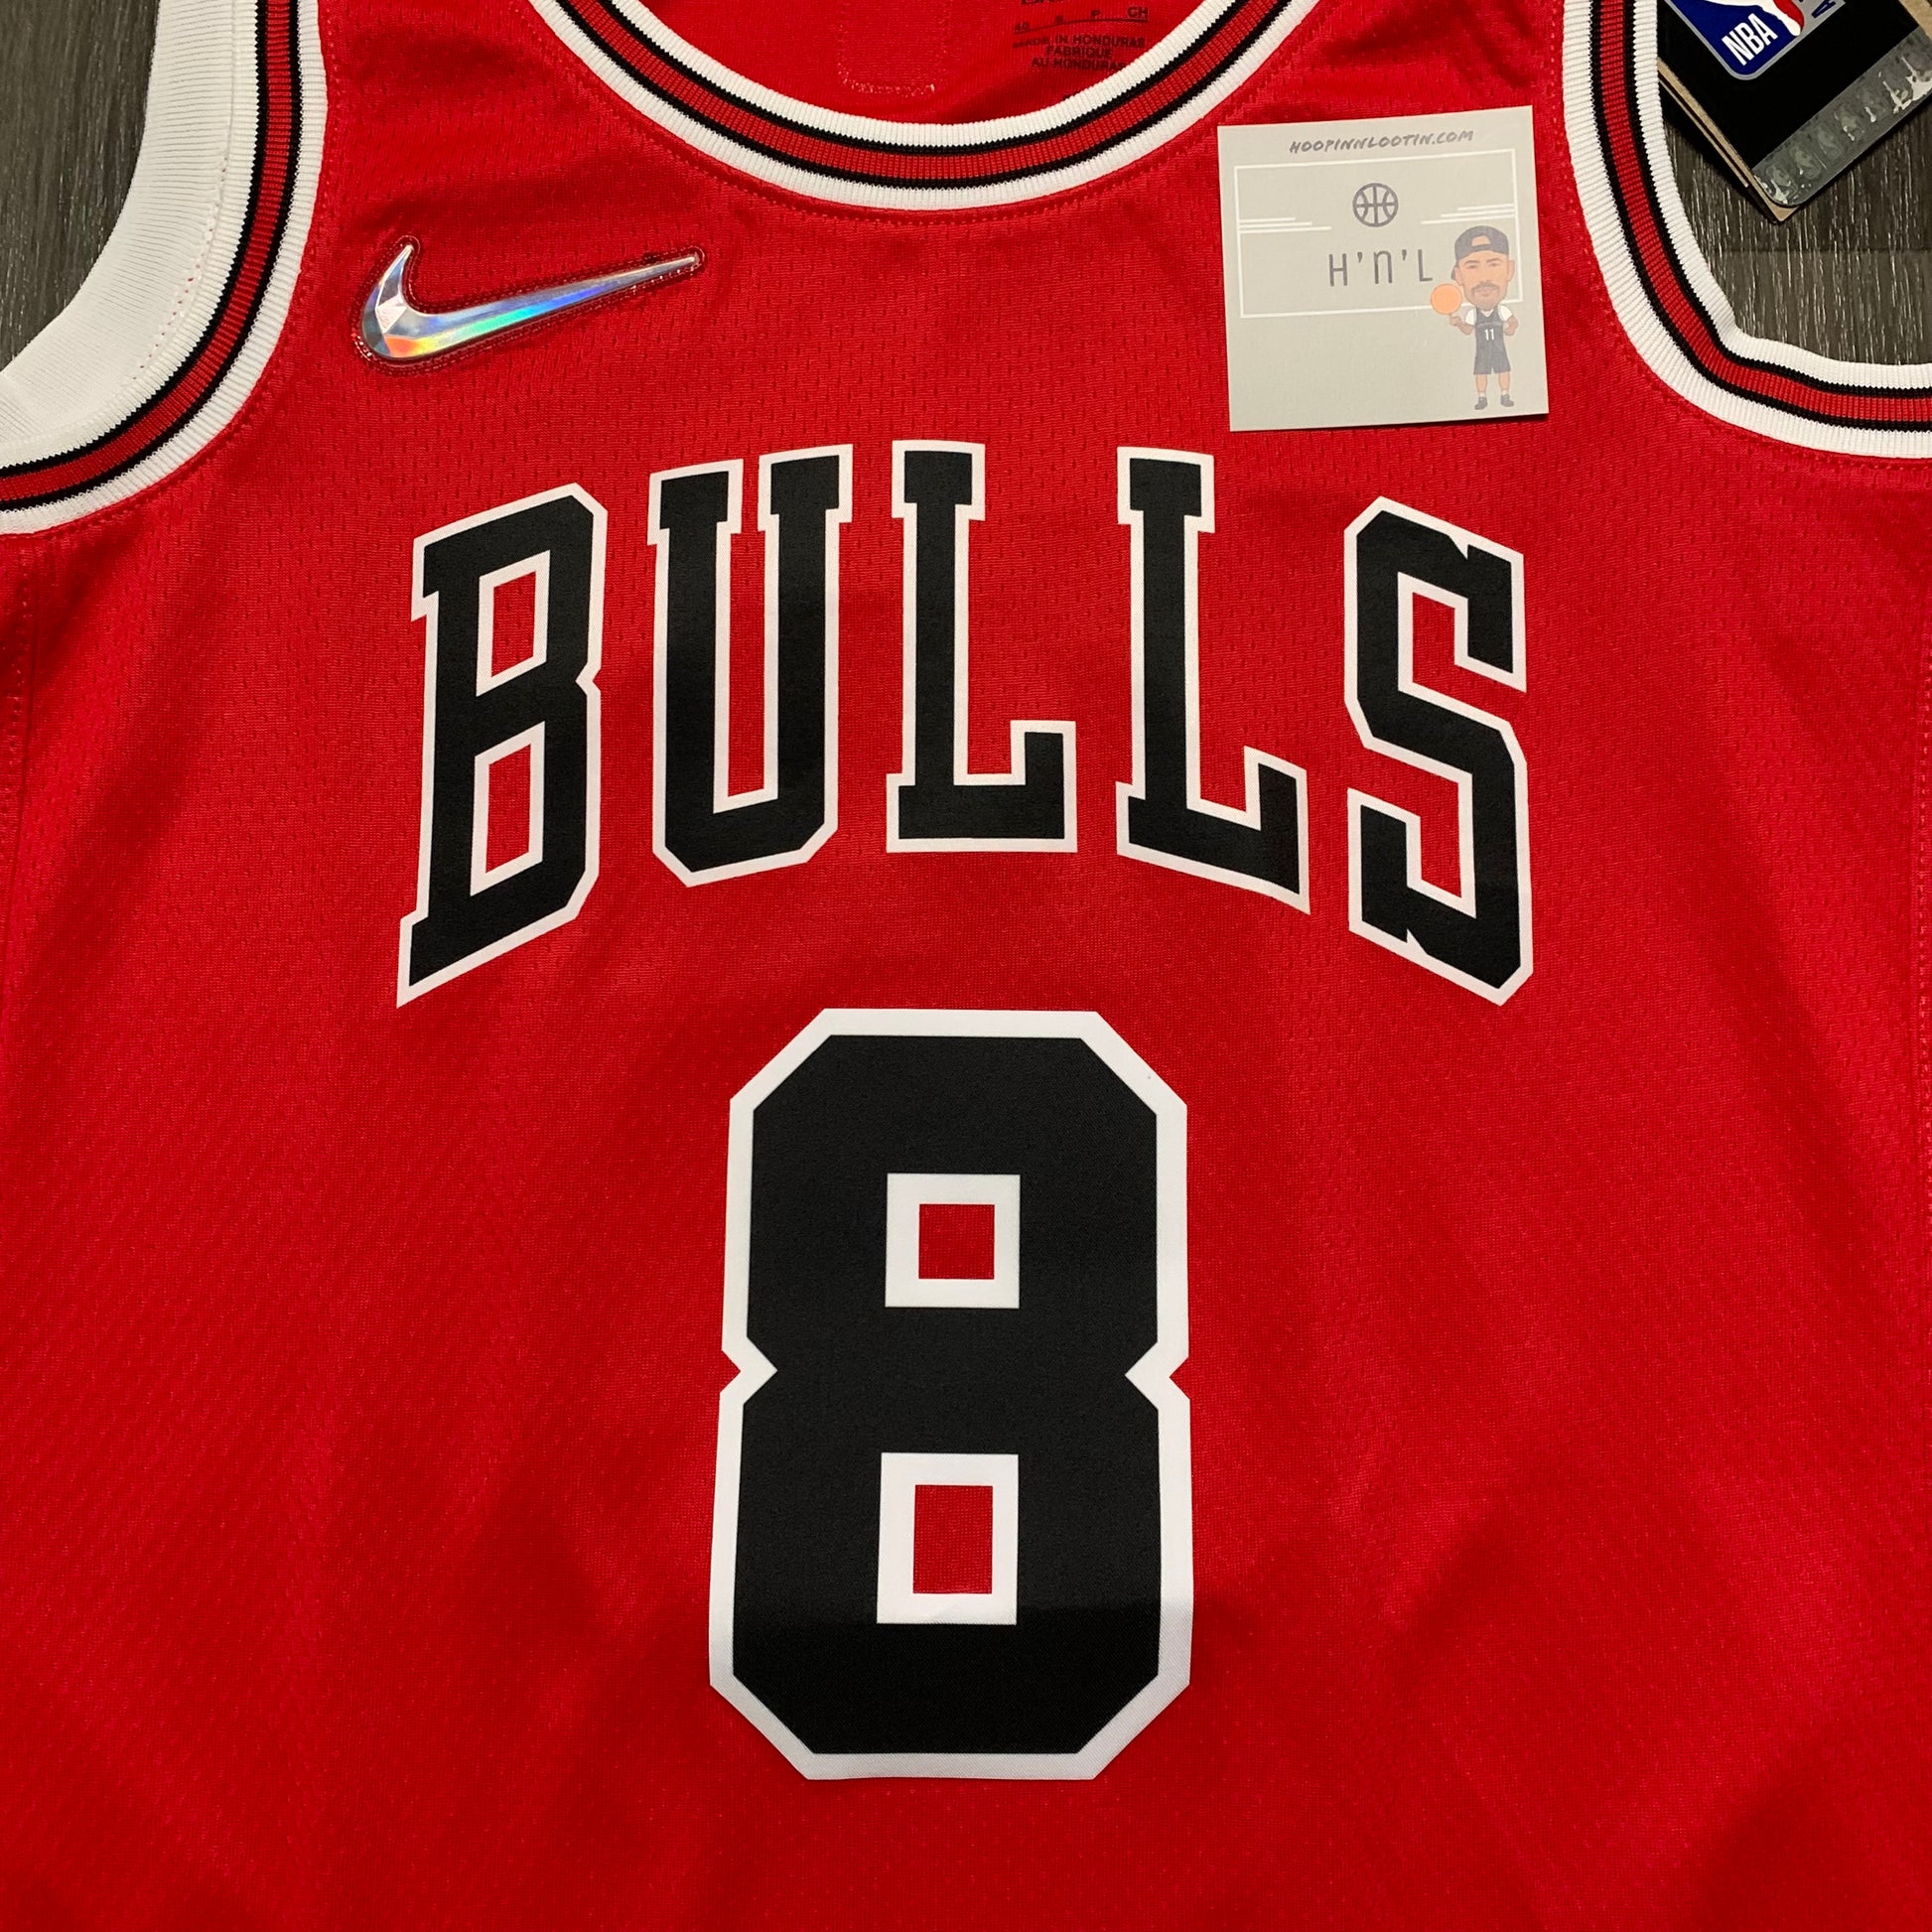 Zach Lavine Chicago Bulls 2021-22 City Edition Jersey with 75th Anniversary  Logos